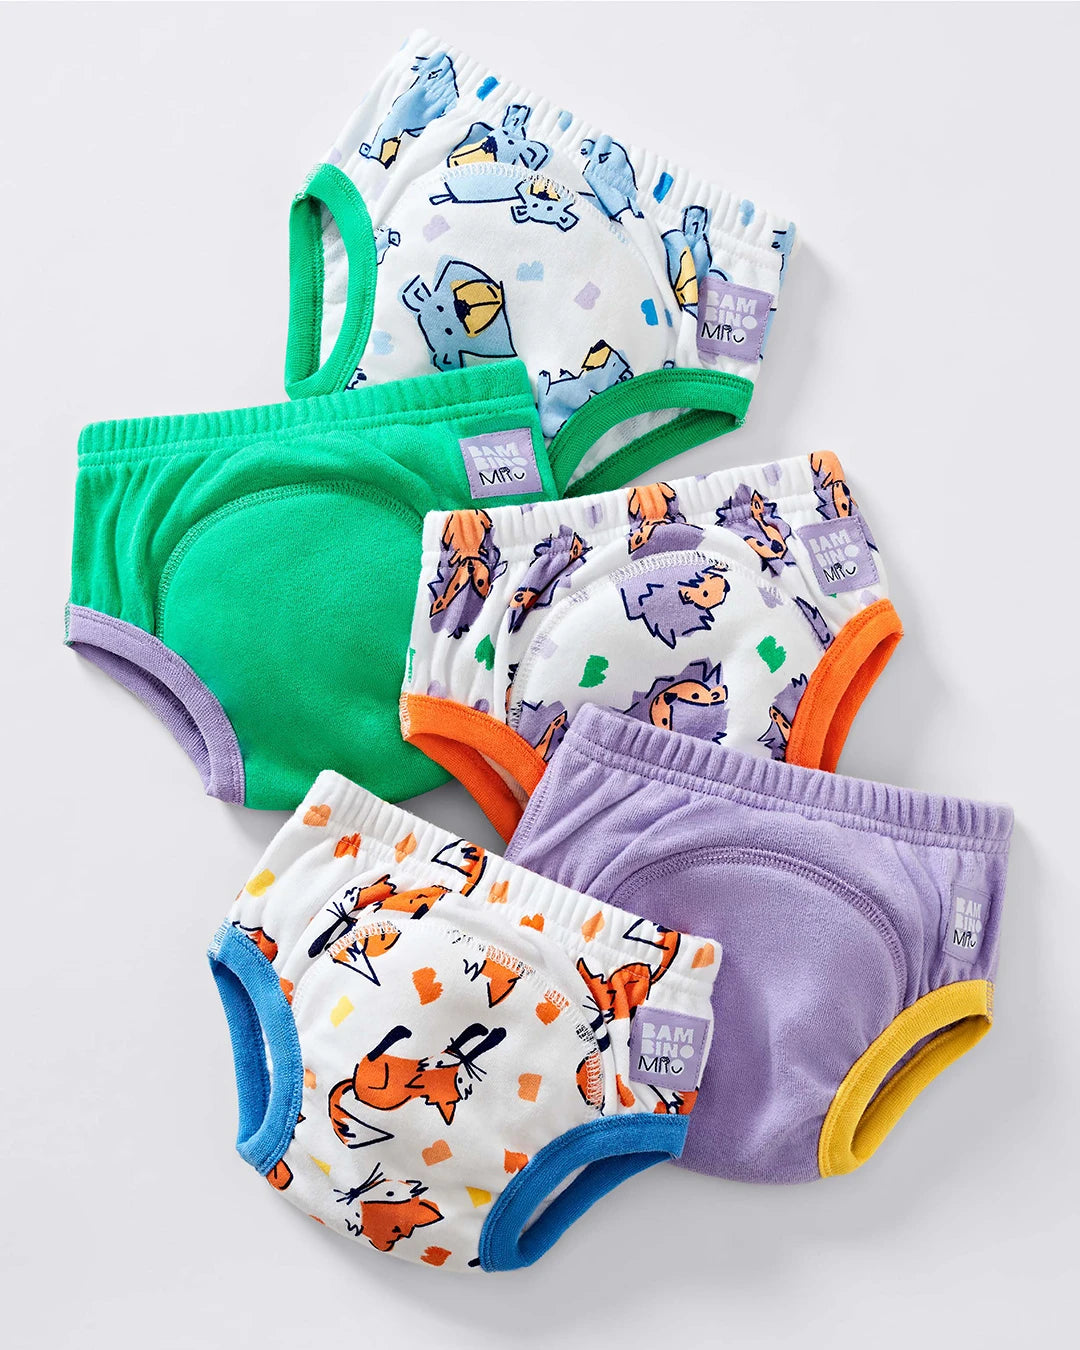  Toddler Girls Training Pants 4 Pack,Baby Girls Cotton Training  Underwear,Potty Training Underwear Girls MUL 2T: Clothing, Shoes & Jewelry